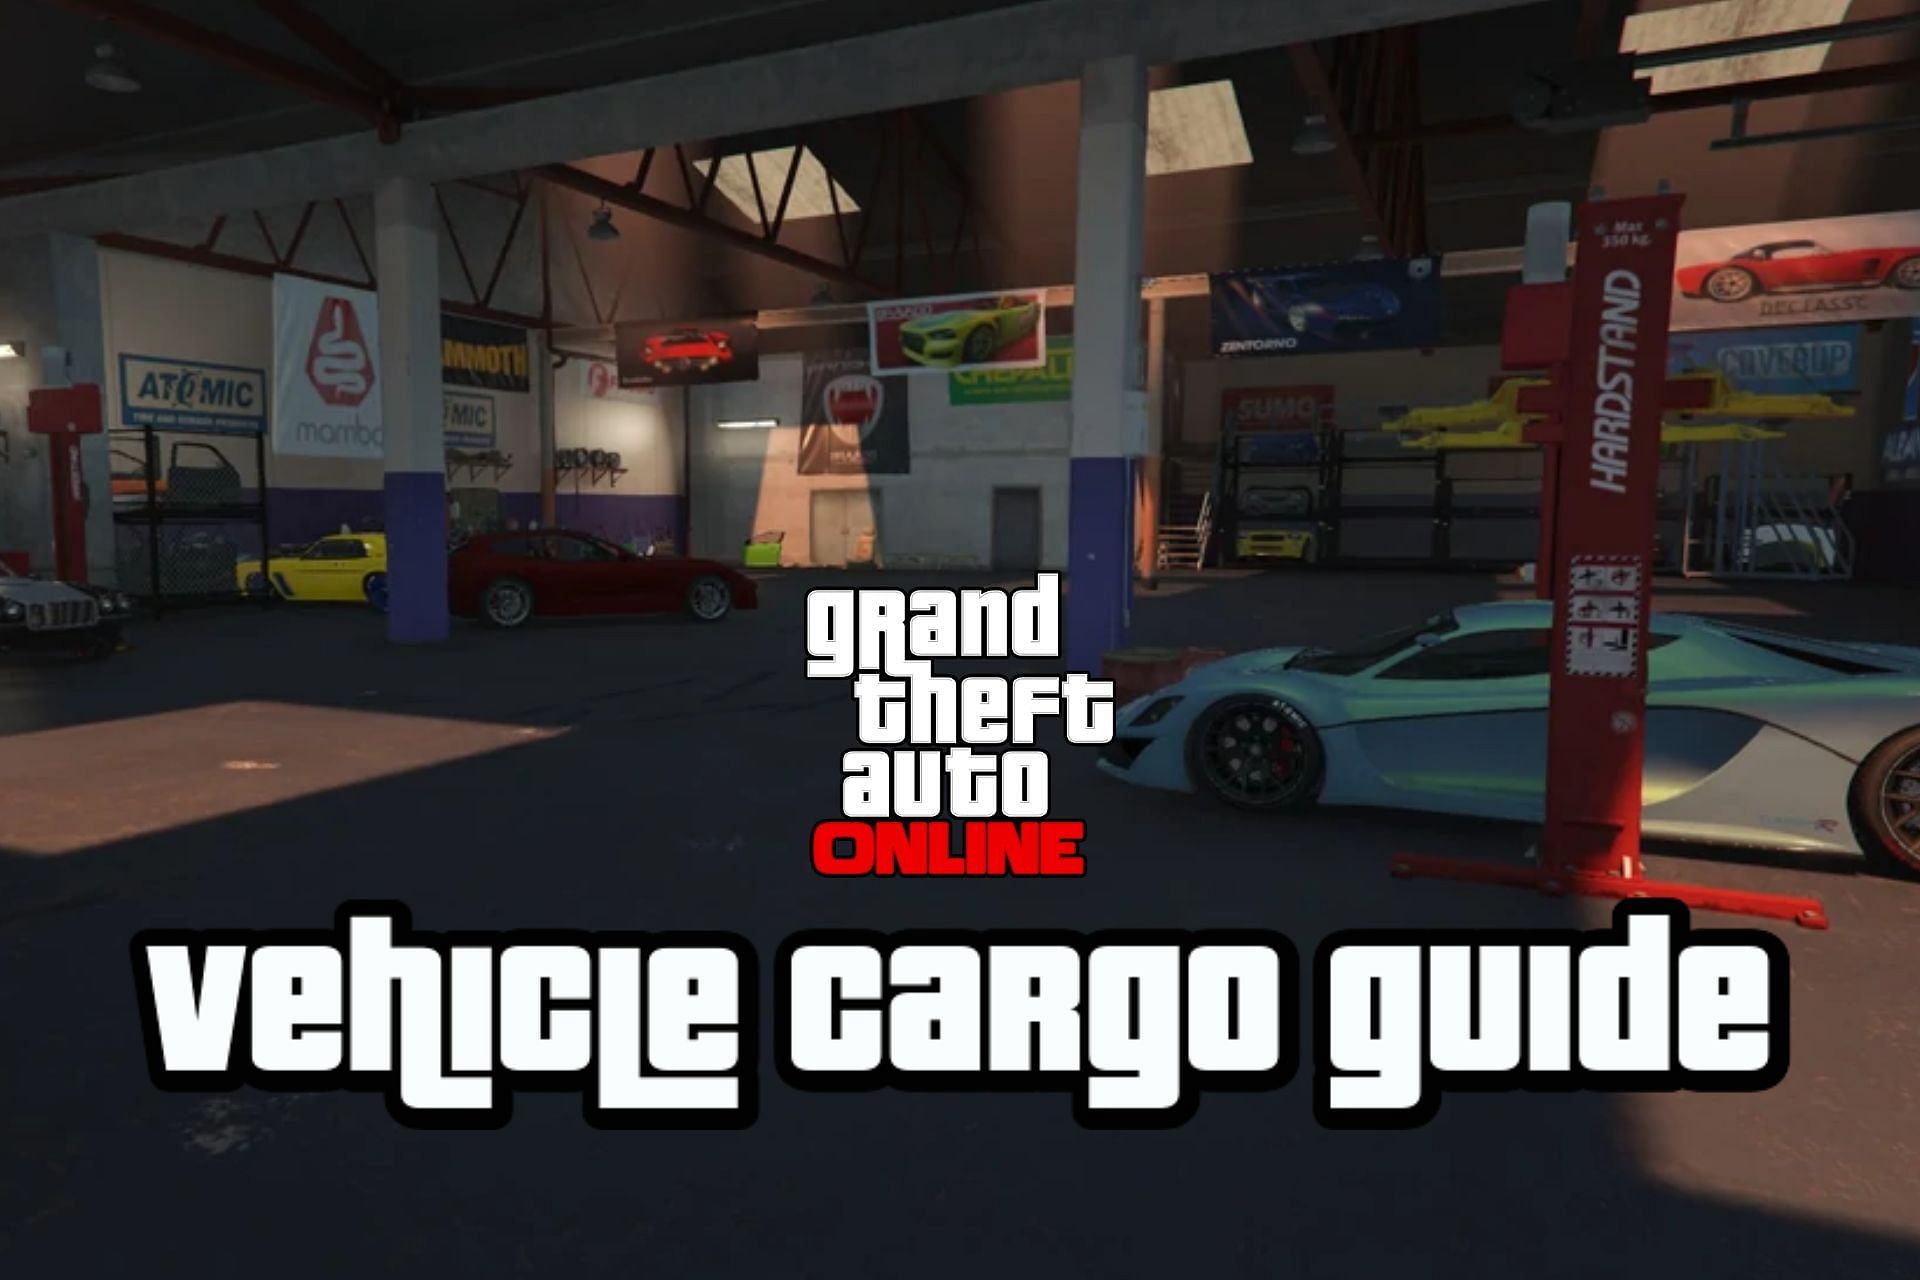 Vehicle Cargo Warehouse is one of the best businesses to own in GTA Online (Image via GTA Fandom)